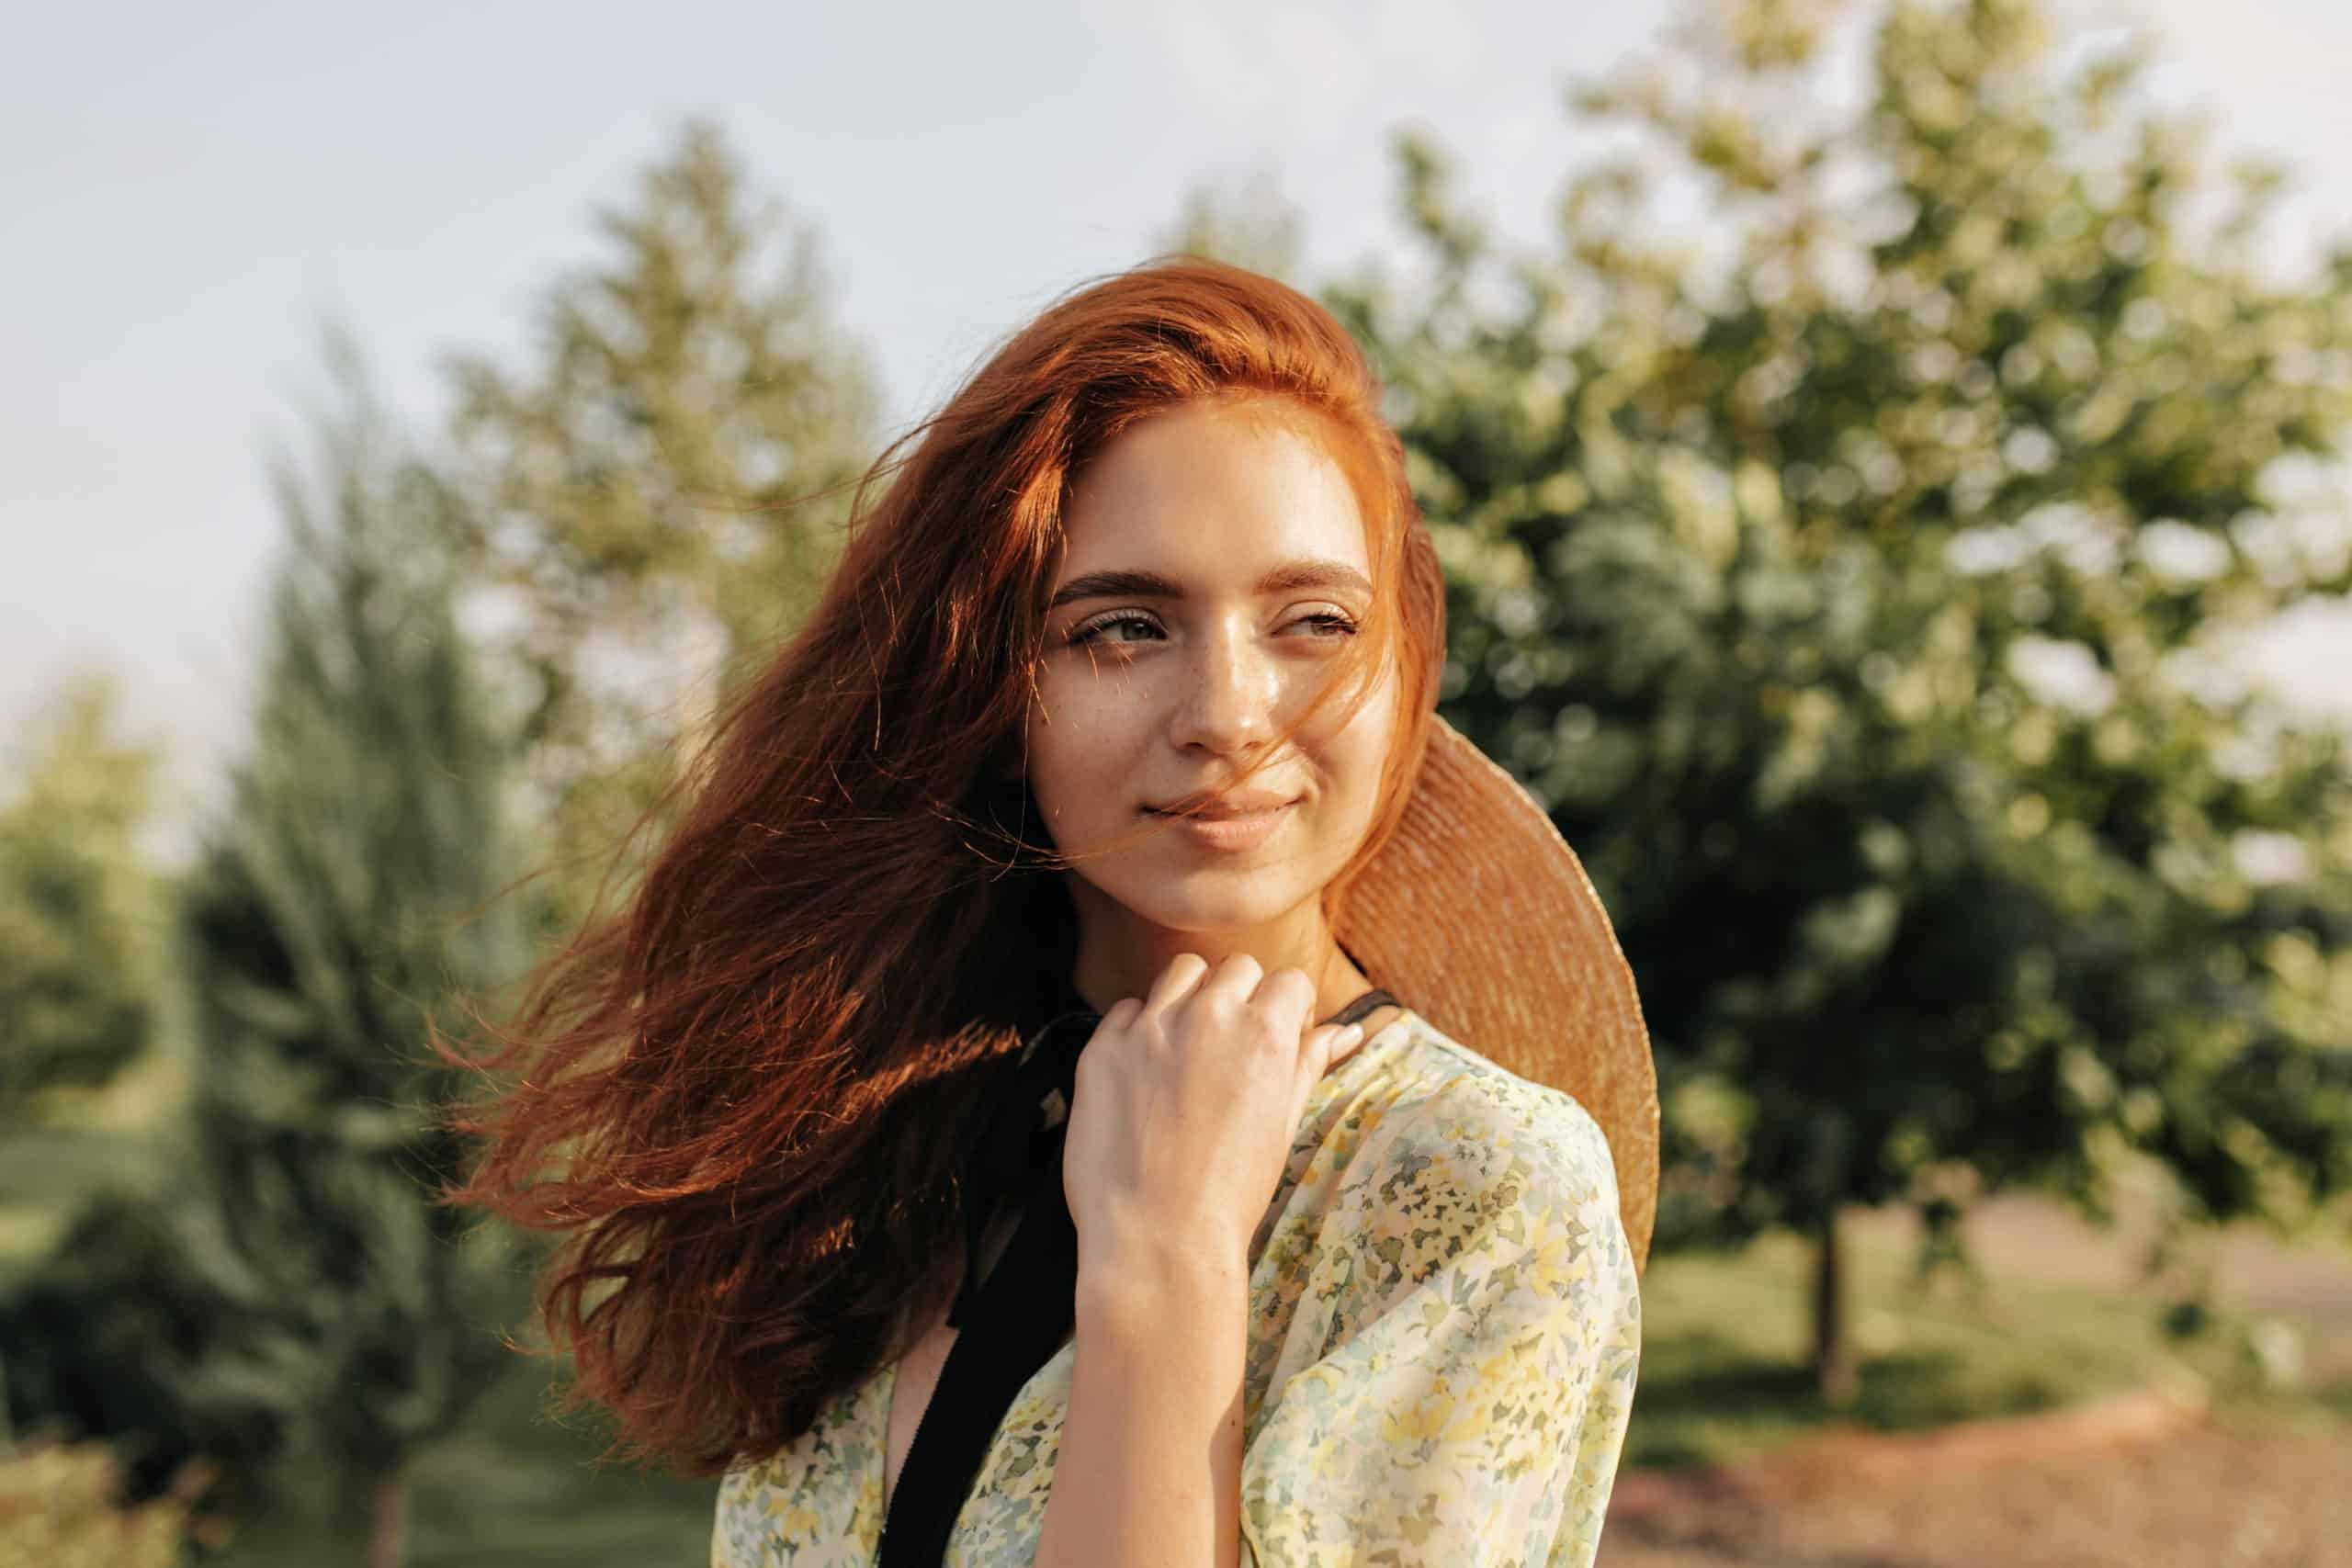 Red haired young woman with cute freckles and brown eyes smiling and looking away outdoor.